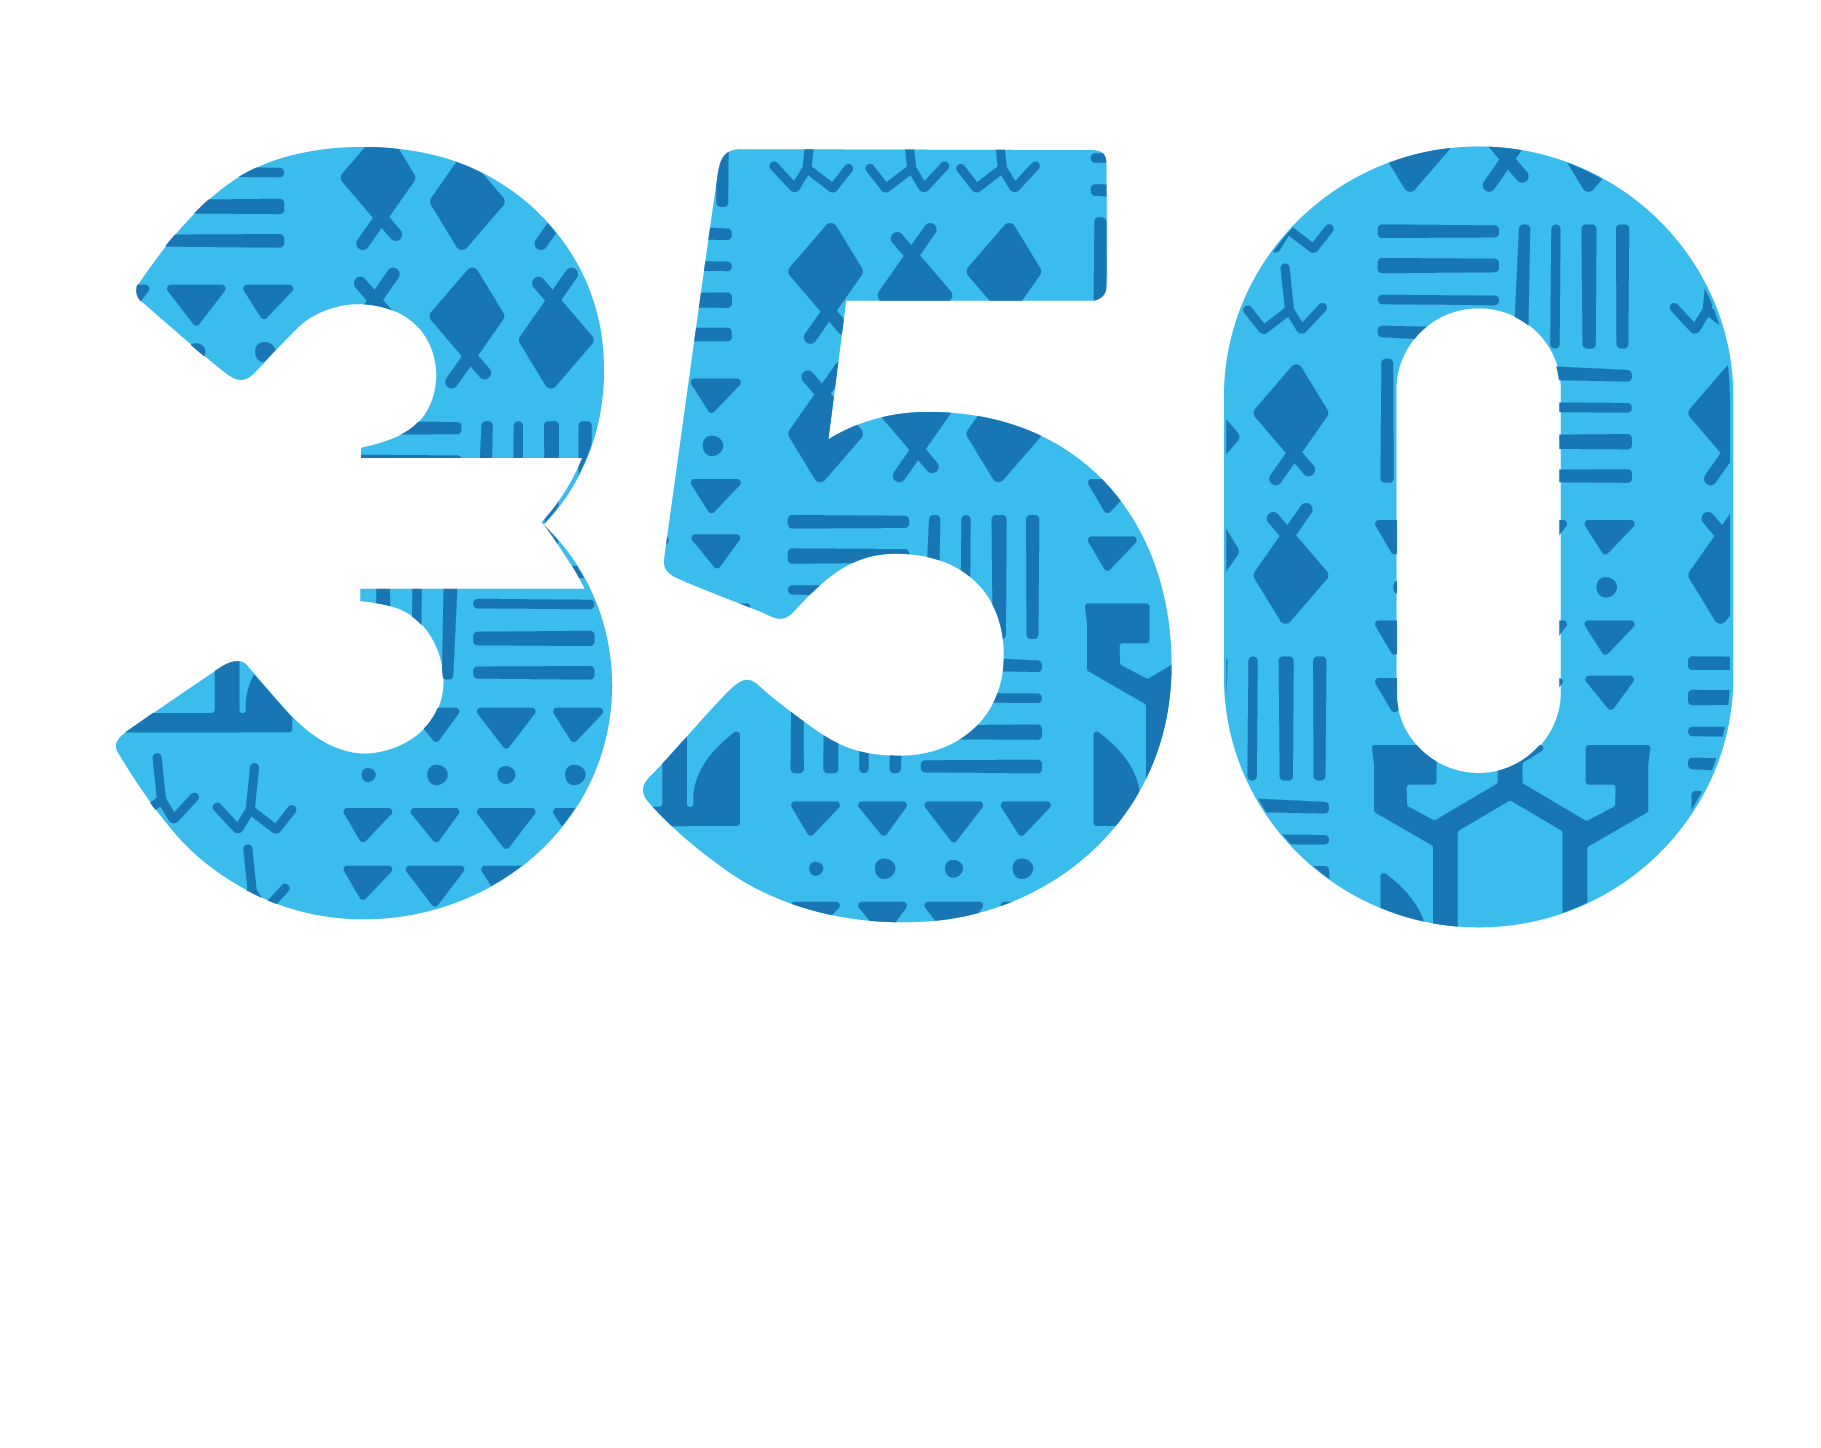 350 Pacific